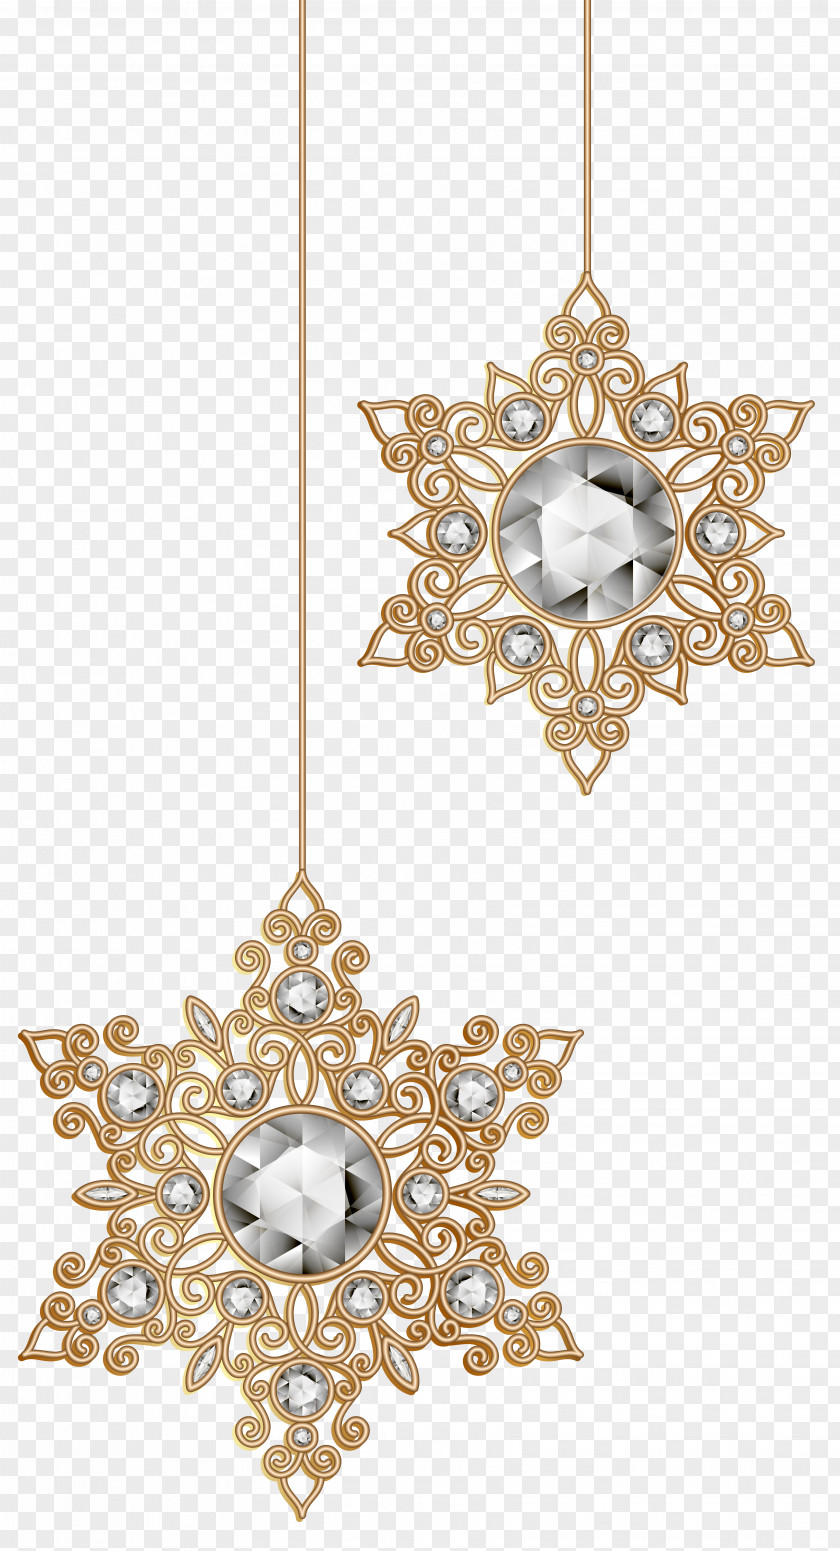 Christmas Material Elements Snowflake Ornament Clip Art PNG